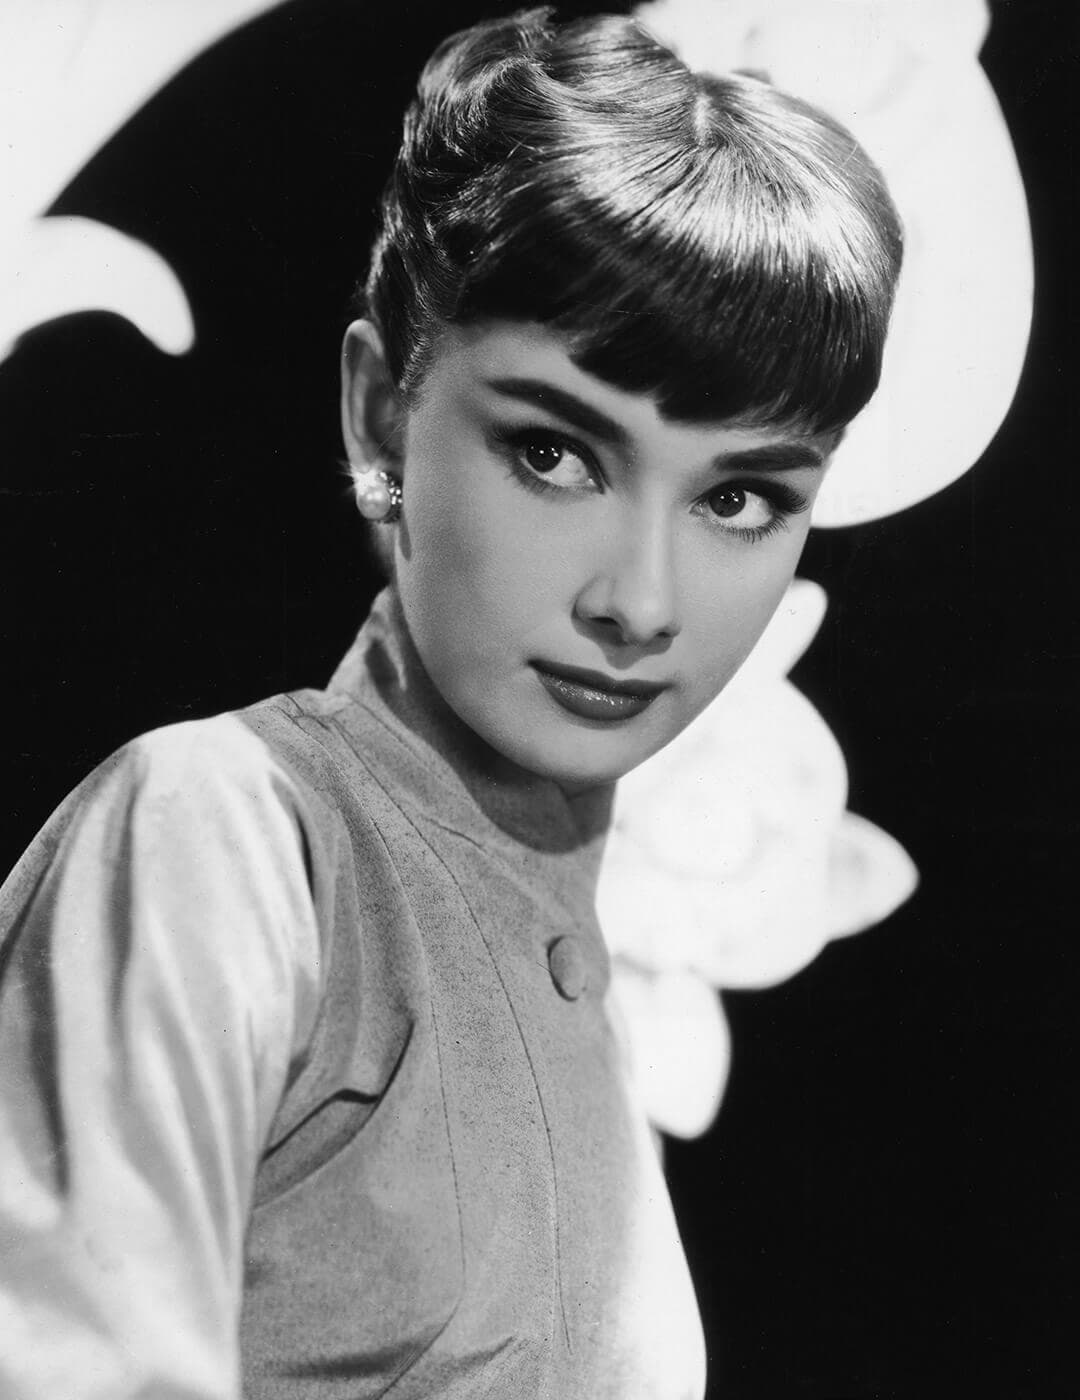 Black and white portrait of American actress Audrey Hepburn